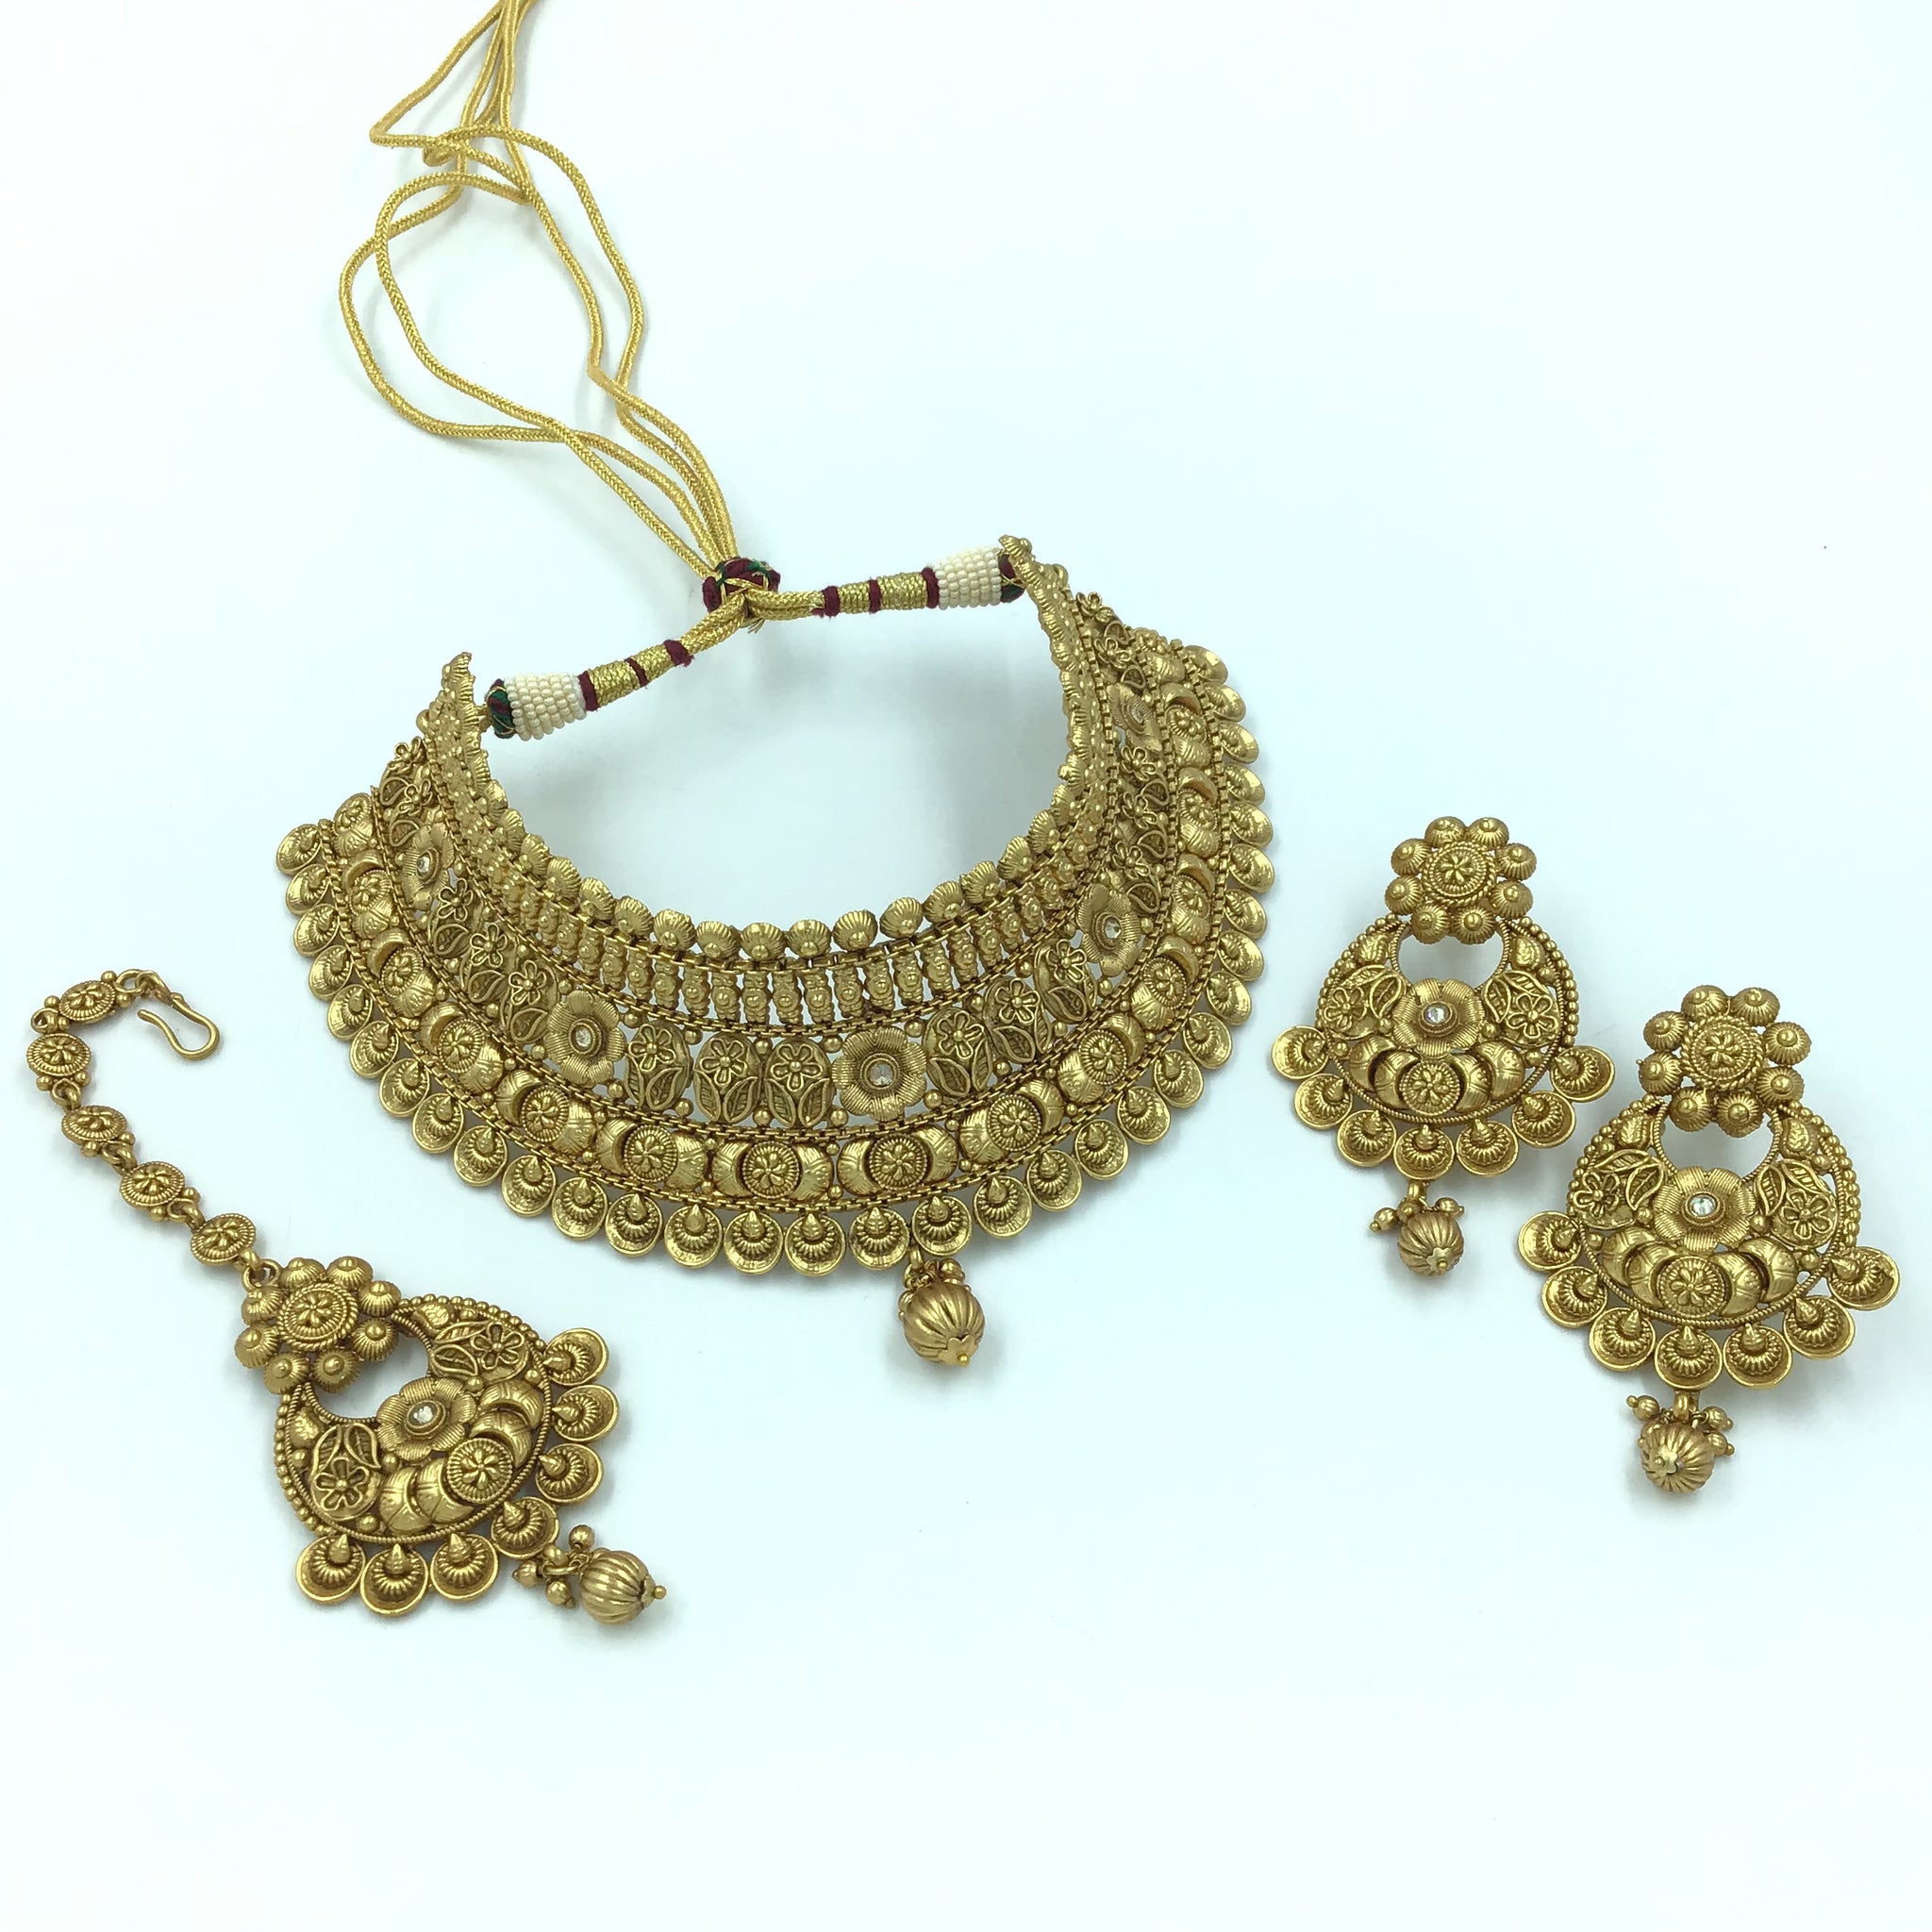 Antique Gold Plated Choker Necklace Set 10001-28